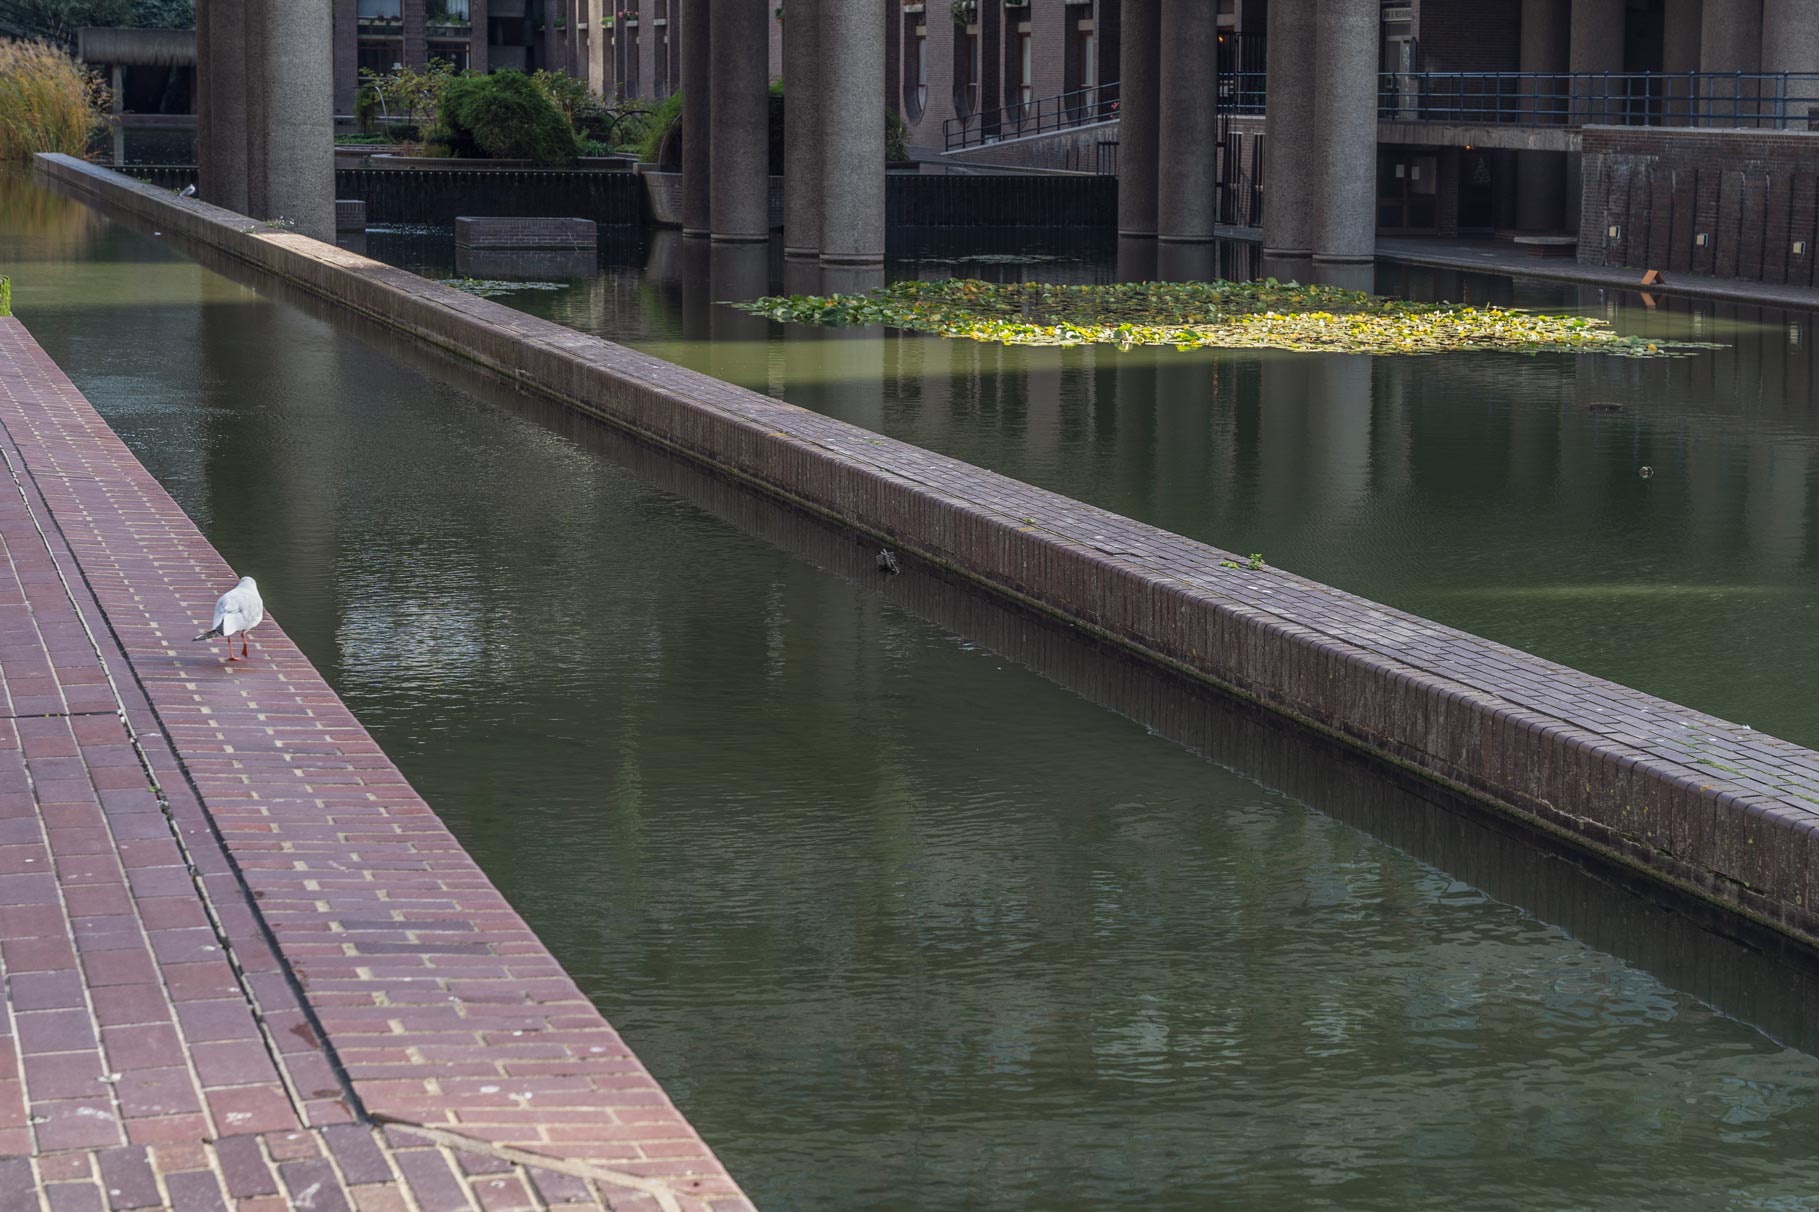 A bird walking next to the water at the Barbican Center in London